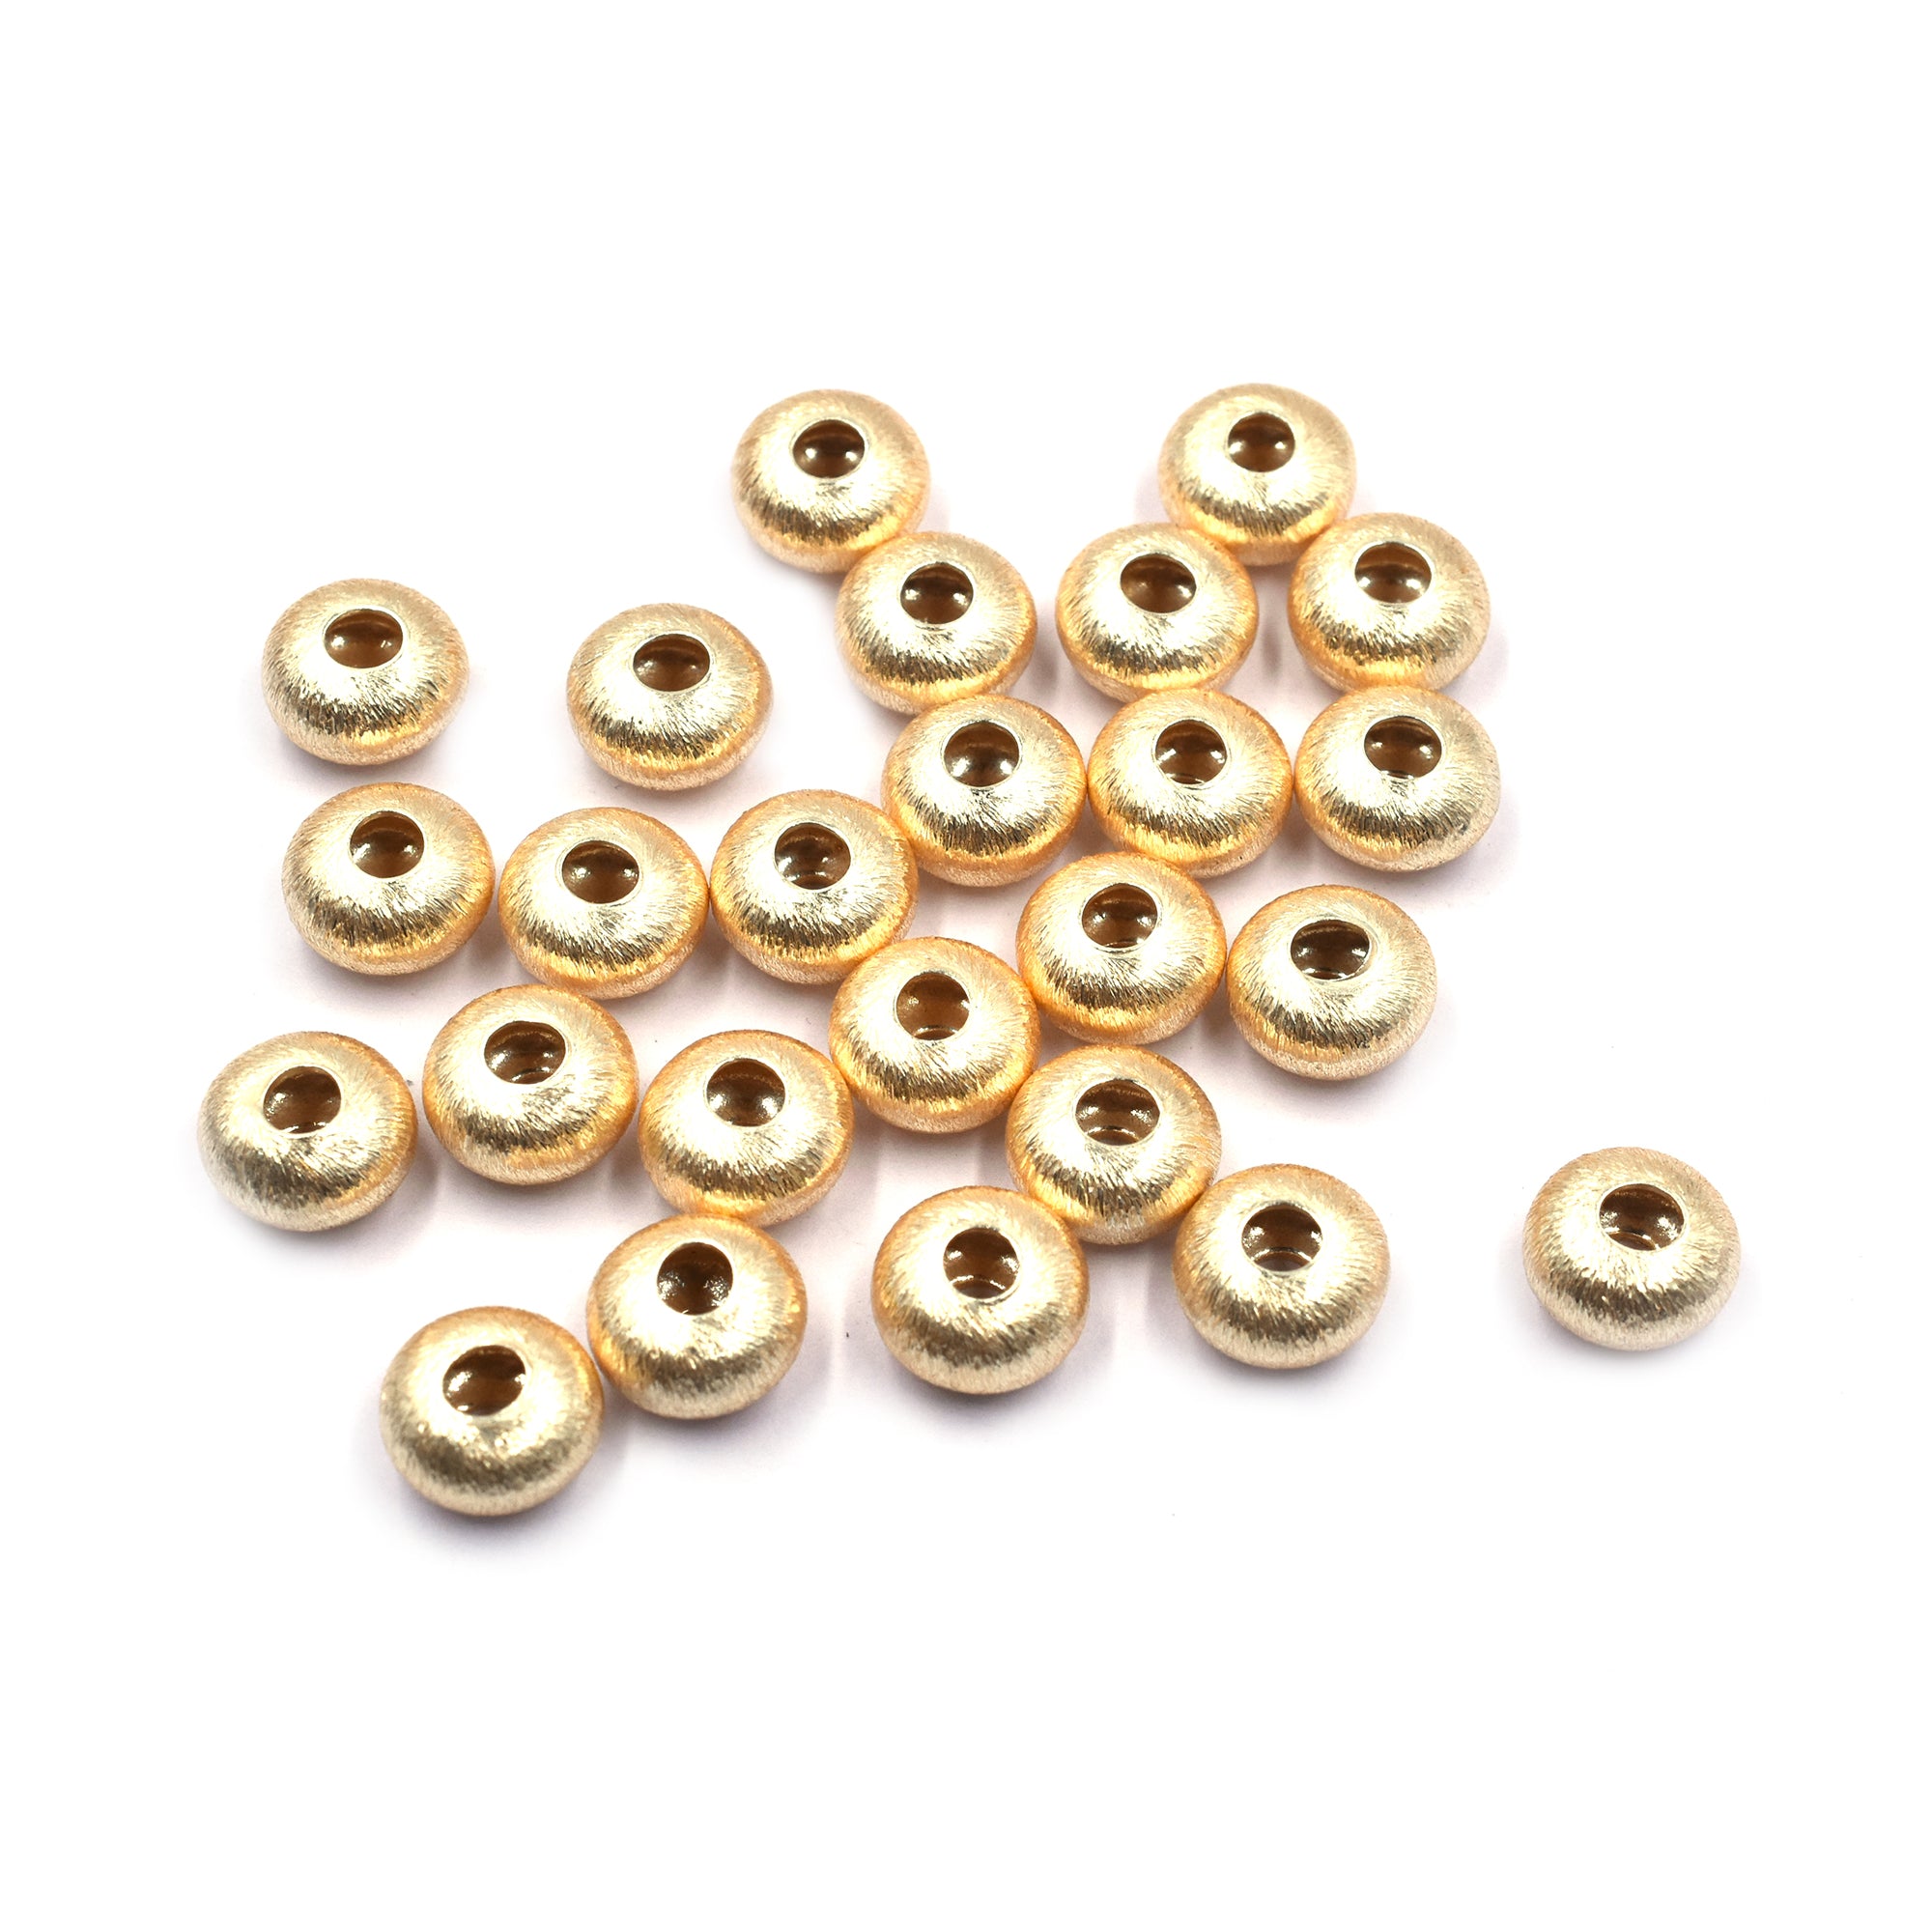 20 Pcs 12mm Donut Brushed Matte Finish Beads Gold Plated Copper